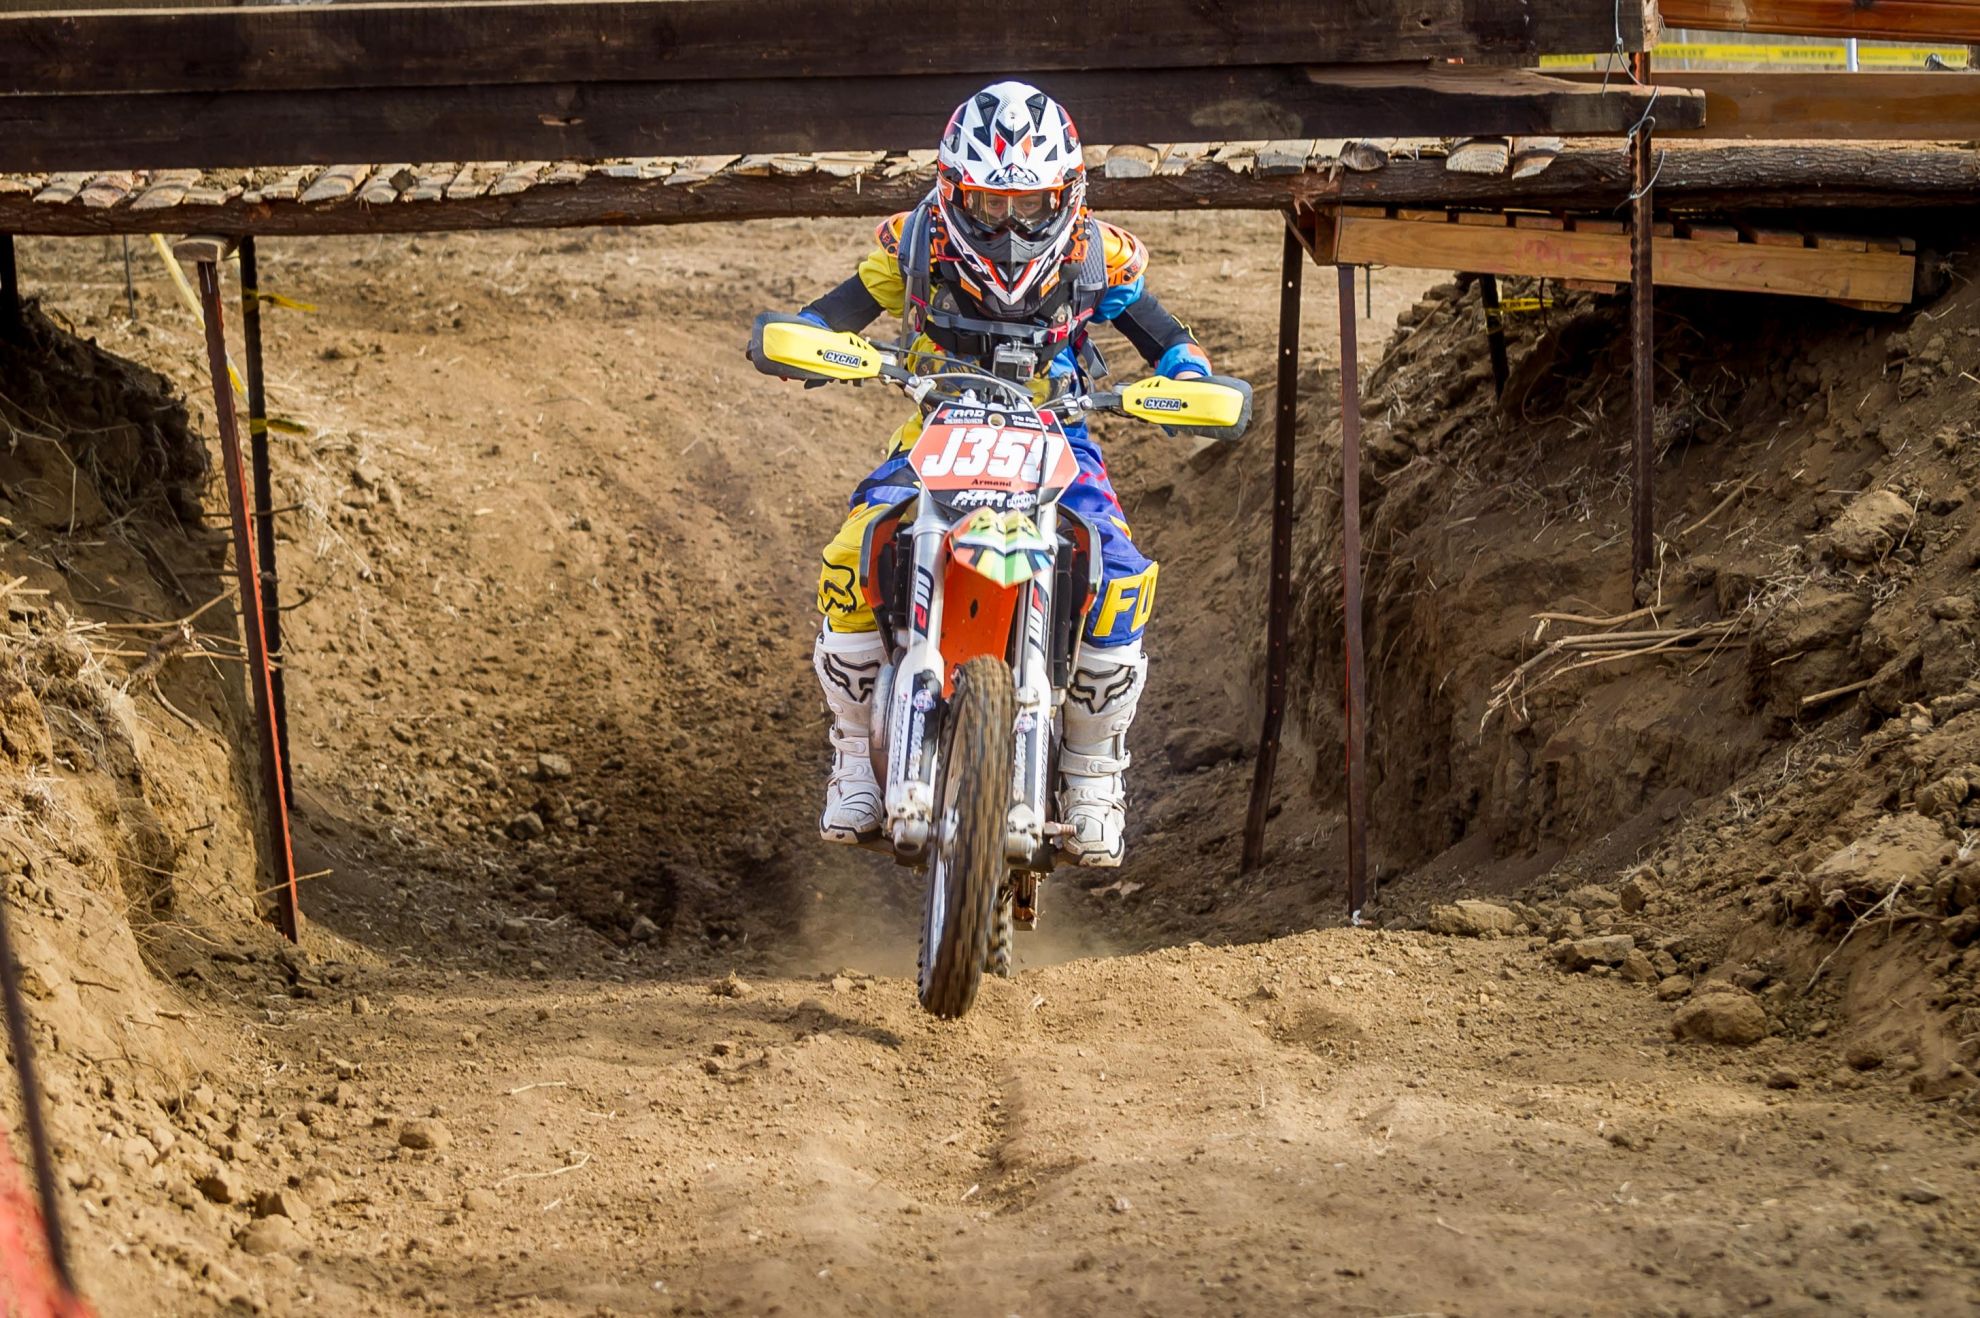 JUNIOR-NATIONAL-OFF-ROAD-MOTORCYCLE-QUAD-CHAMPIONSHIPS-Armand-Fourie